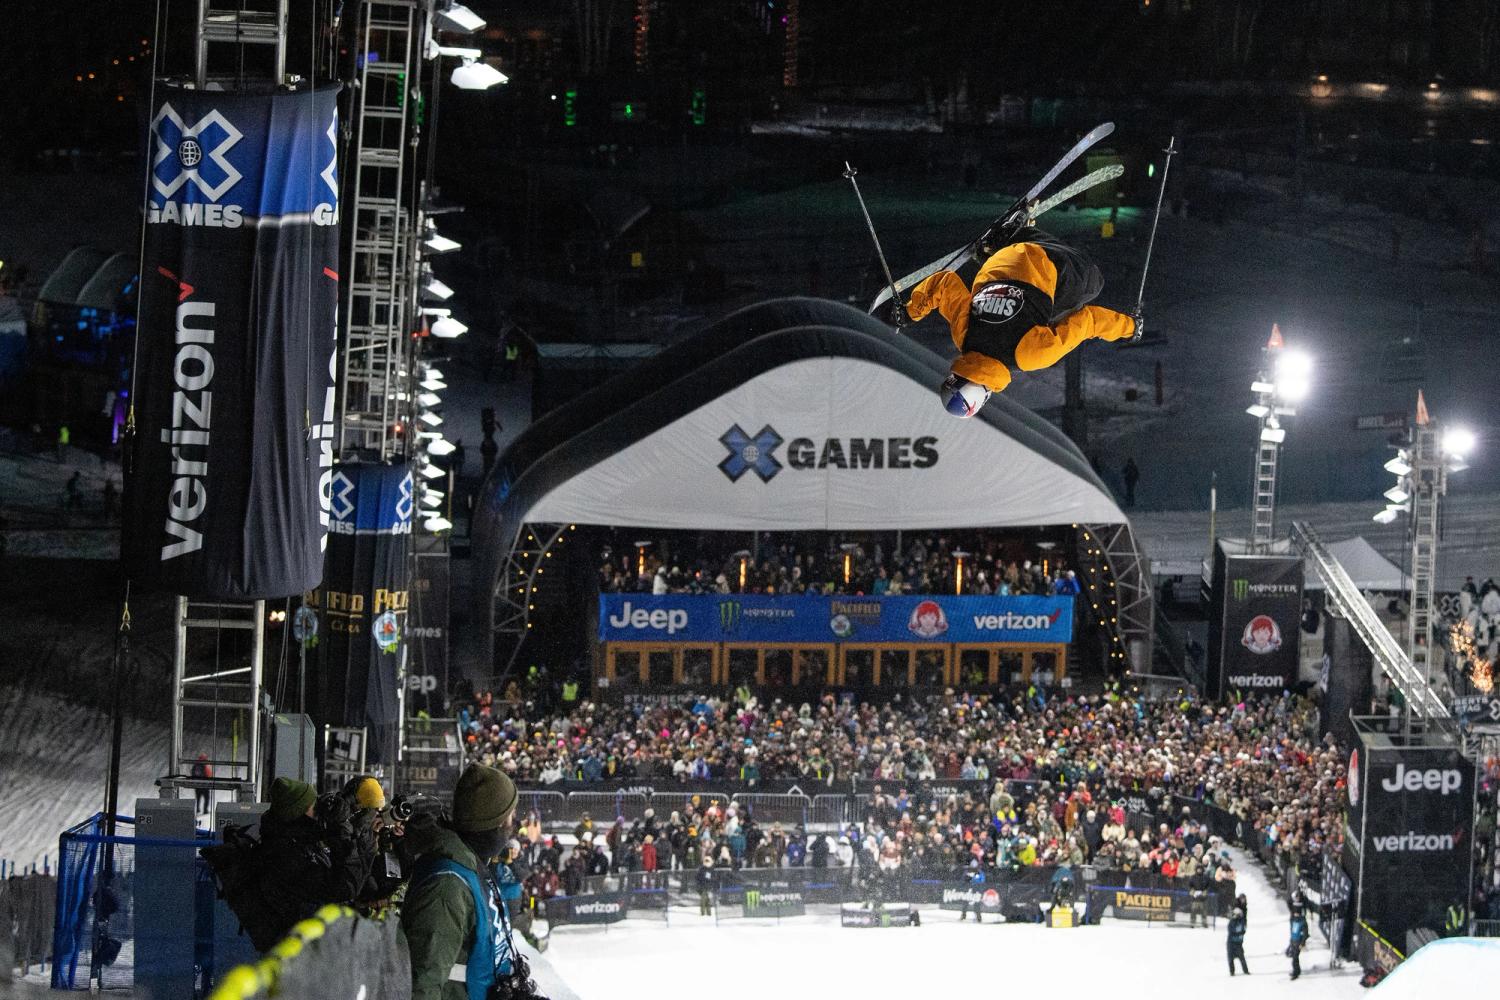 Winter X Games 2012 Men's SNB SuperPipe preview: Shaun White and